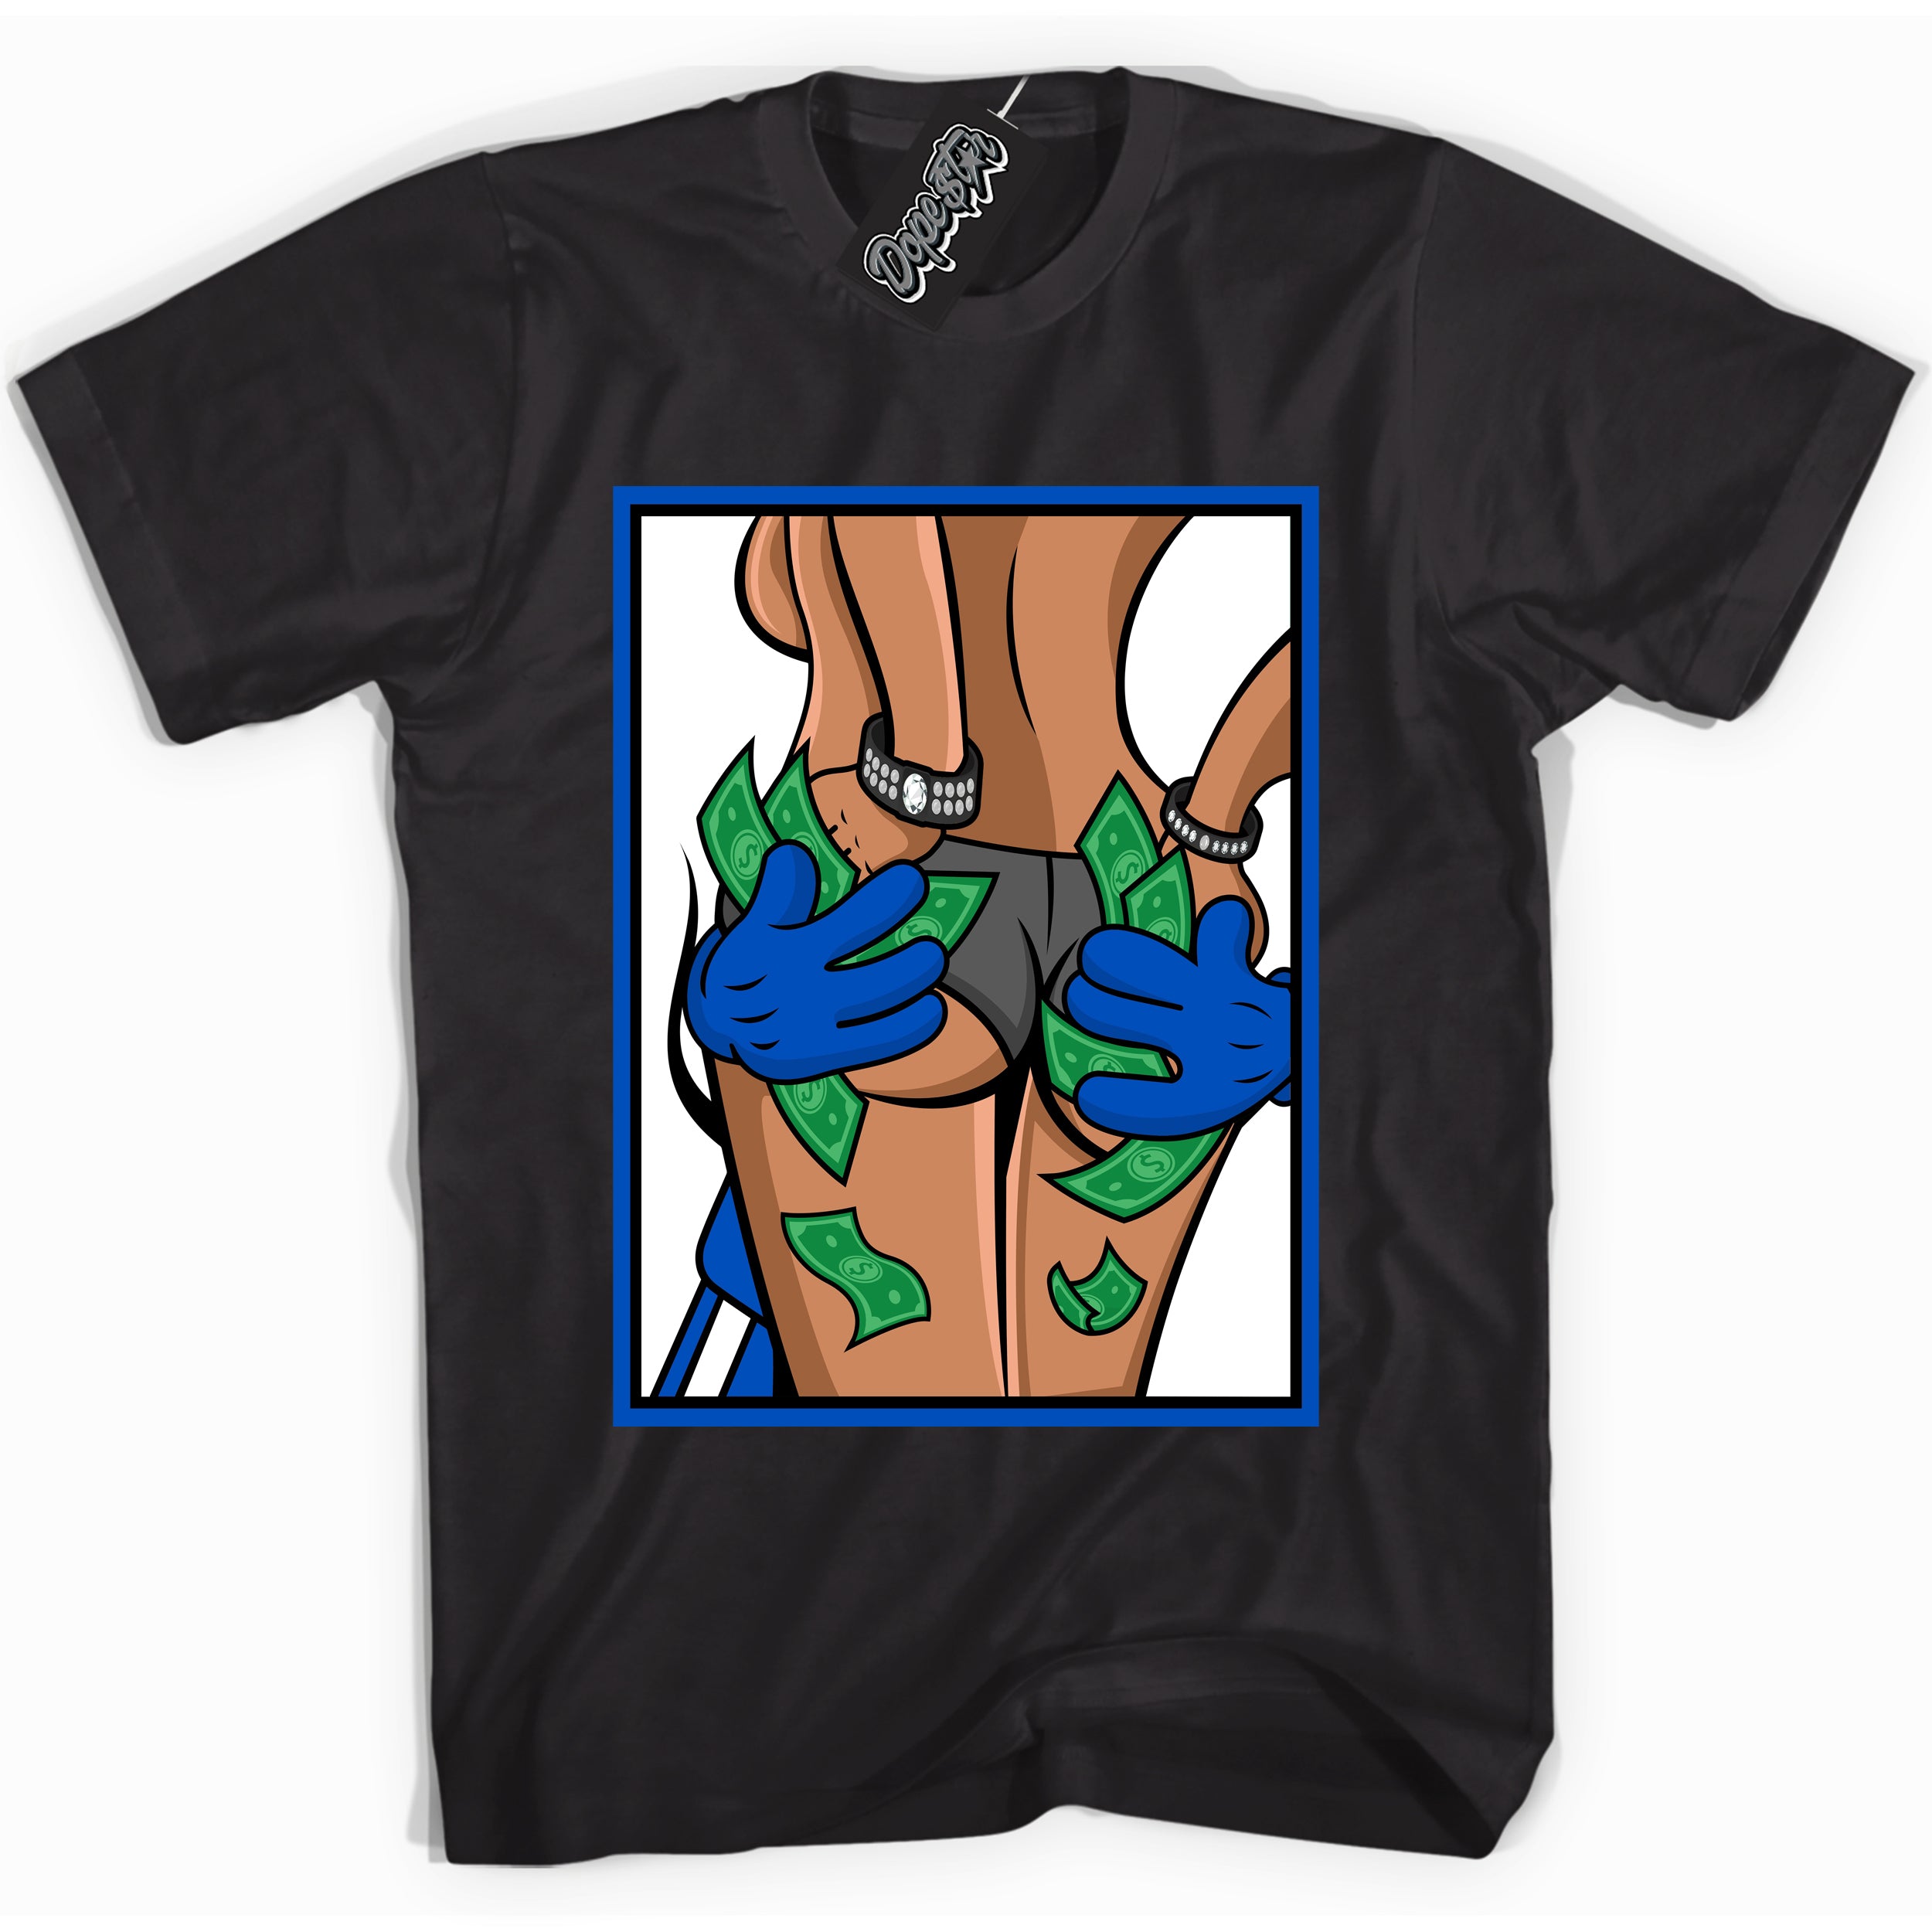 Cool Black graphic tee with Money Hands print, that perfectly matches OG Royal Reimagined 1s sneakers 